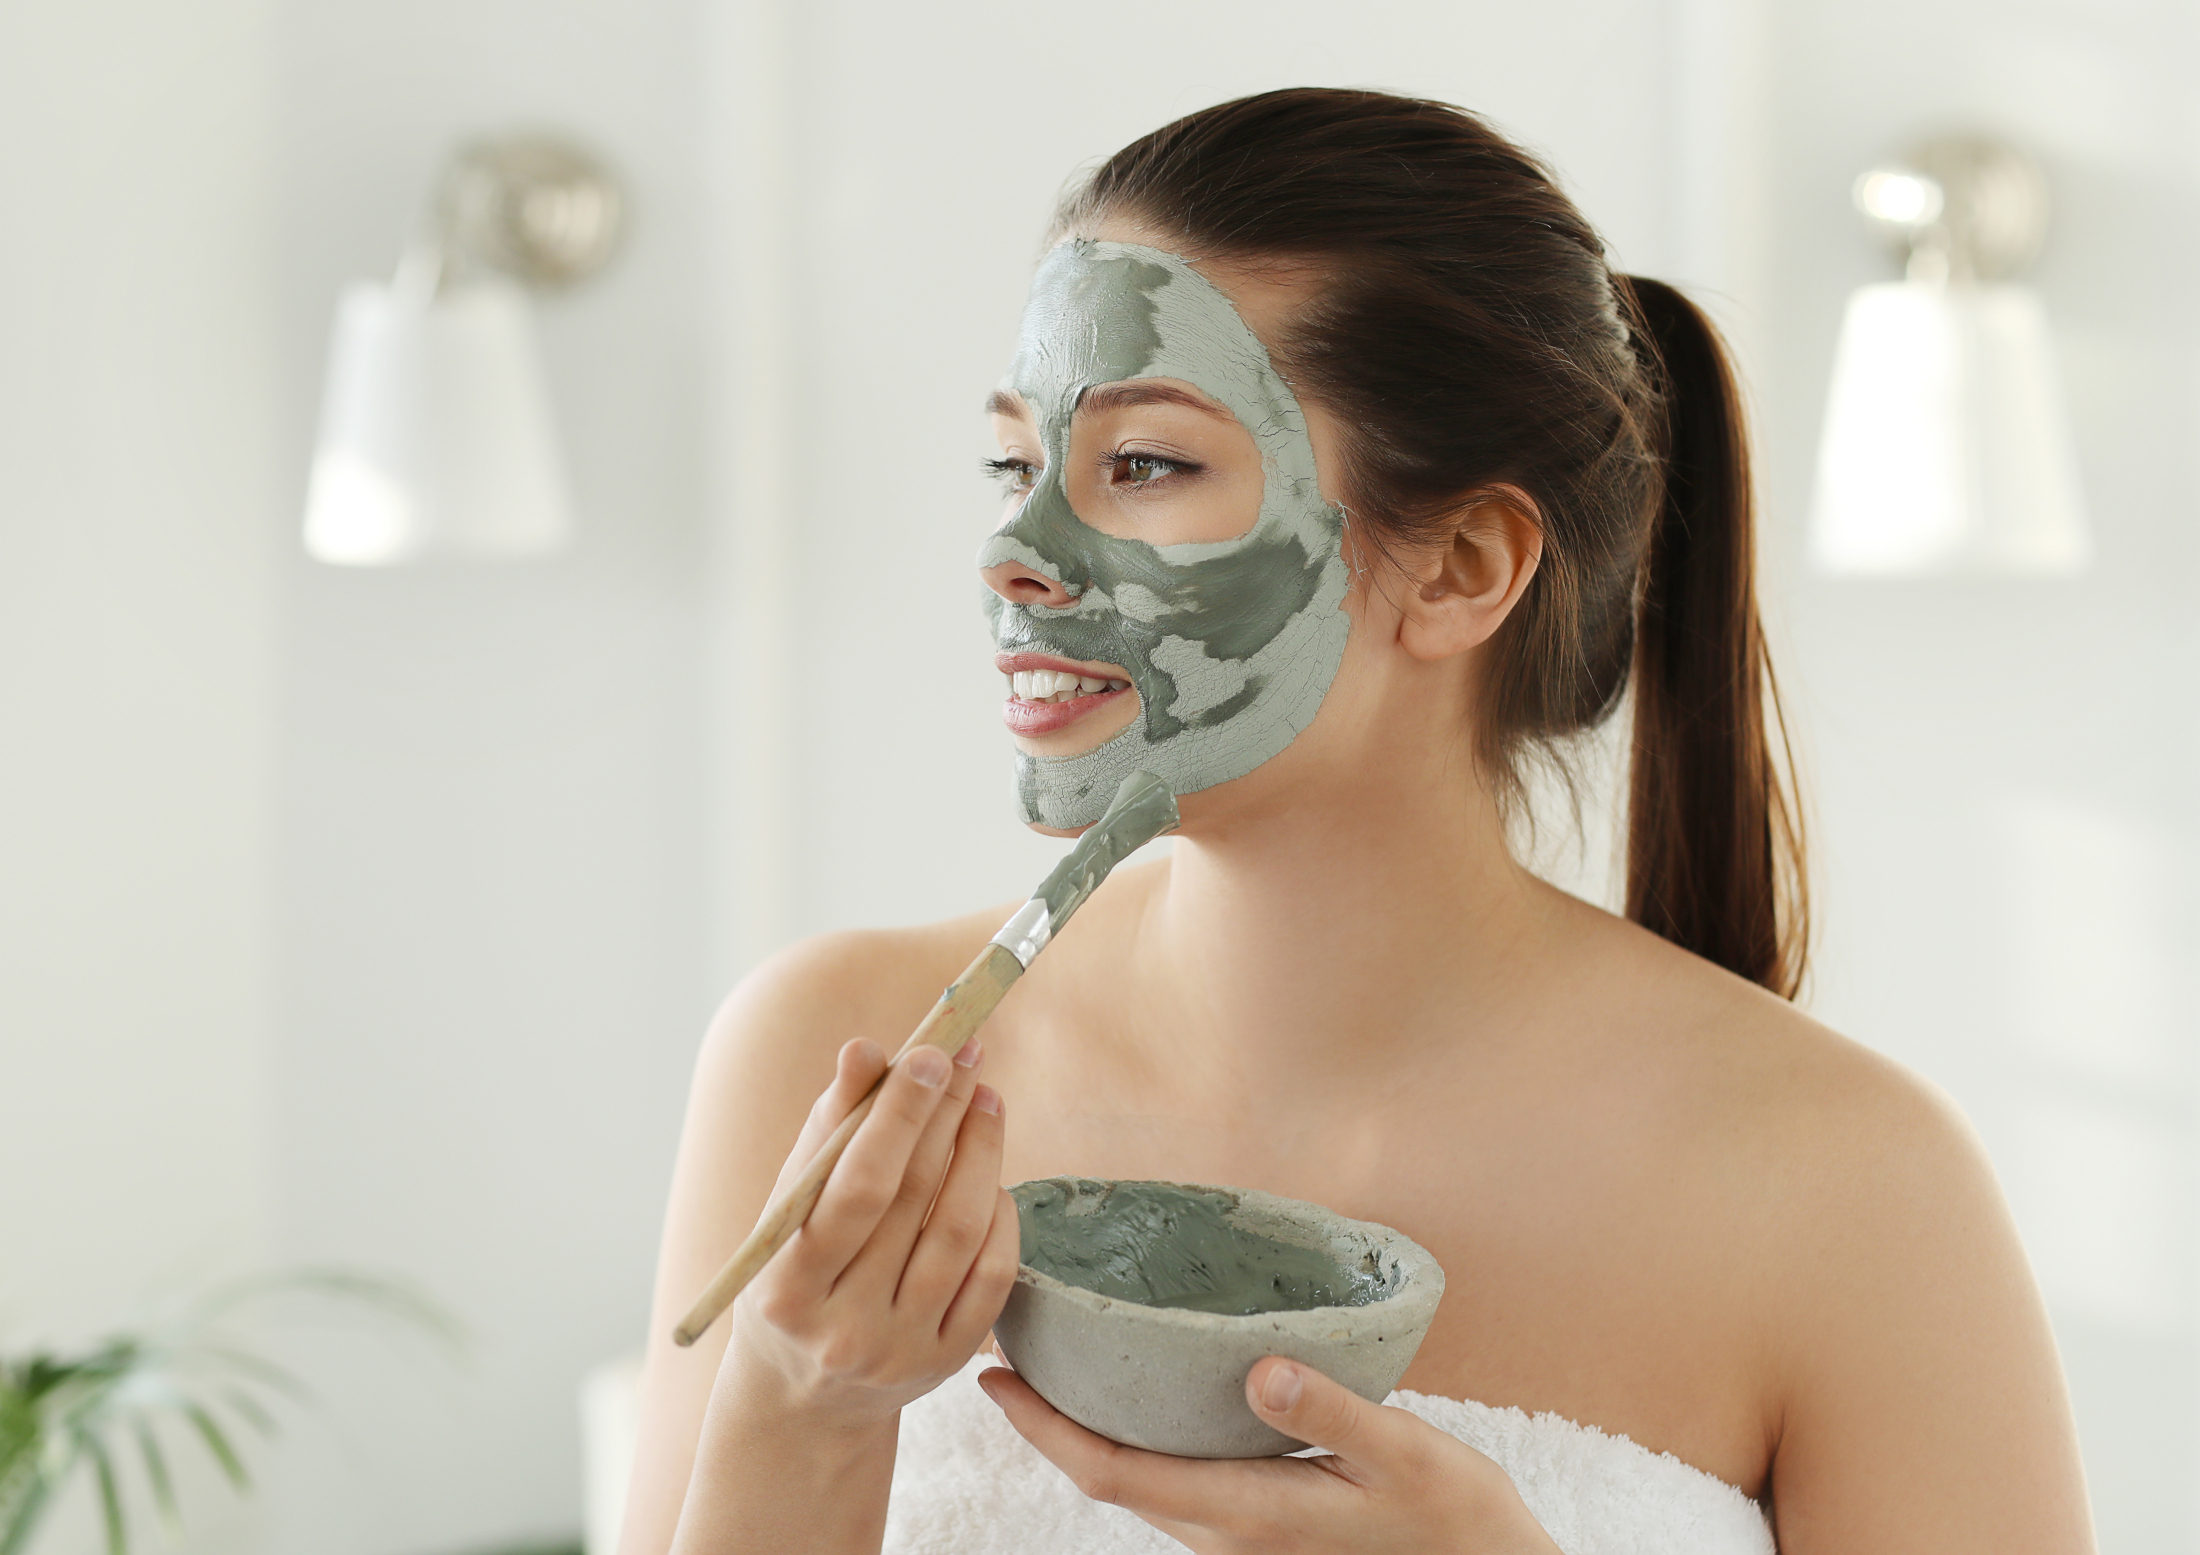 woman-with-facial-mask-skin-care-beauty-concept.jpg